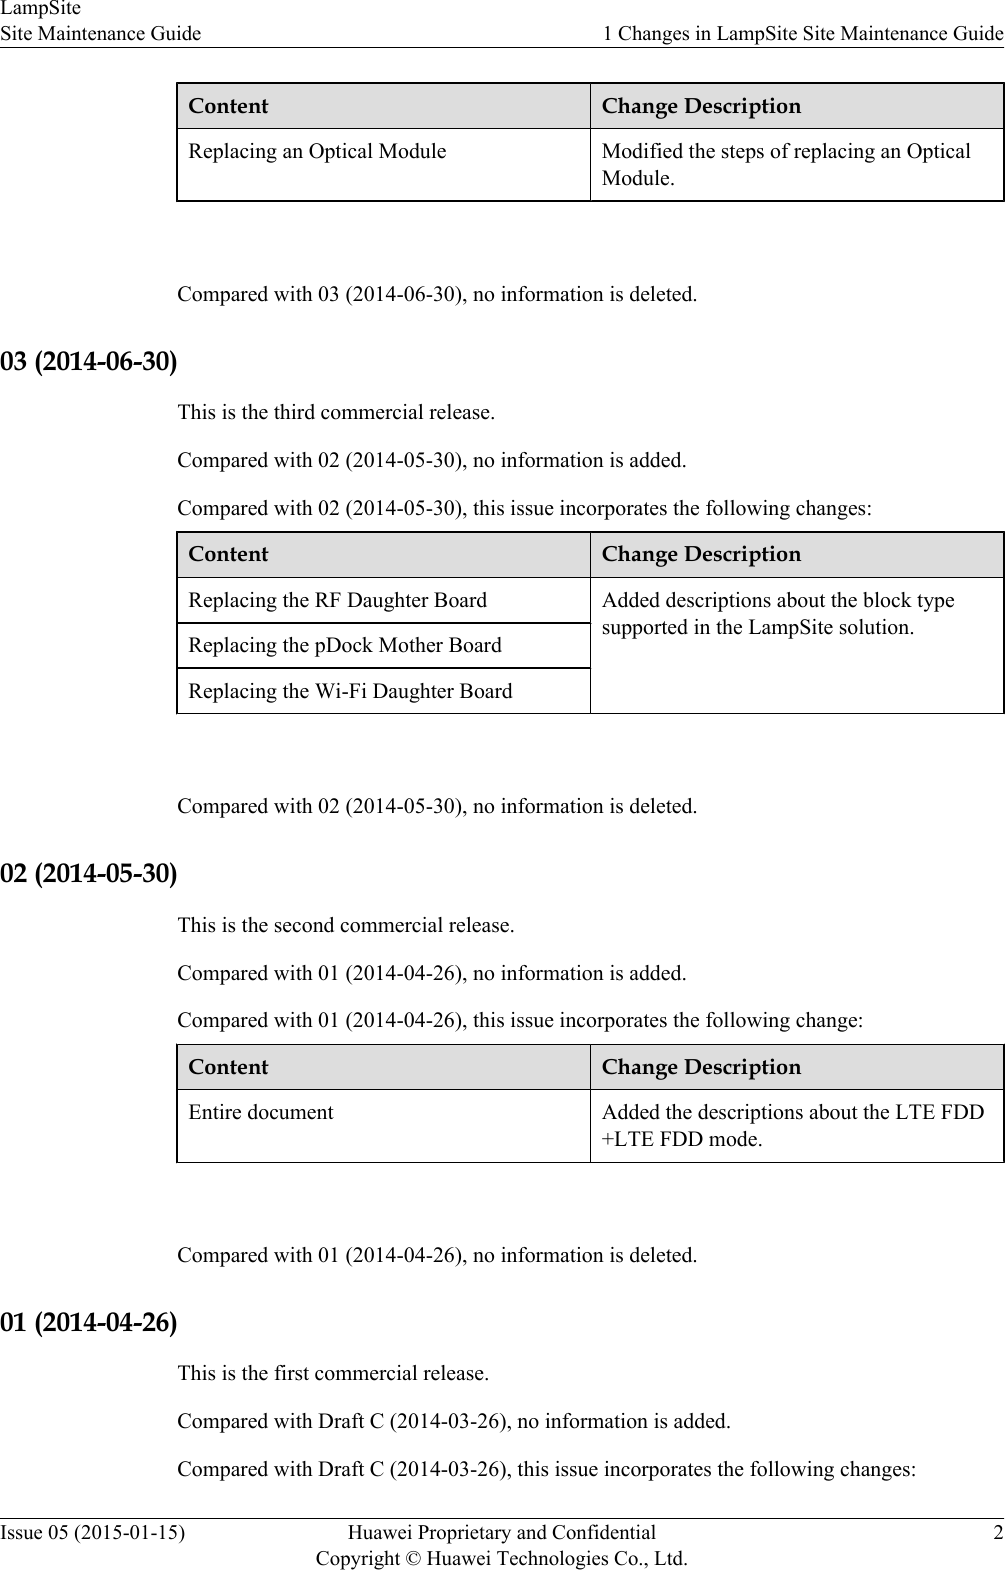 Content Change DescriptionReplacing an Optical Module Modified the steps of replacing an OpticalModule. Compared with 03 (2014-06-30), no information is deleted.03 (2014-06-30)This is the third commercial release.Compared with 02 (2014-05-30), no information is added.Compared with 02 (2014-05-30), this issue incorporates the following changes:Content Change DescriptionReplacing the RF Daughter Board Added descriptions about the block typesupported in the LampSite solution.Replacing the pDock Mother BoardReplacing the Wi-Fi Daughter Board Compared with 02 (2014-05-30), no information is deleted.02 (2014-05-30)This is the second commercial release.Compared with 01 (2014-04-26), no information is added.Compared with 01 (2014-04-26), this issue incorporates the following change:Content Change DescriptionEntire document Added the descriptions about the LTE FDD+LTE FDD mode. Compared with 01 (2014-04-26), no information is deleted.01 (2014-04-26)This is the first commercial release.Compared with Draft C (2014-03-26), no information is added.Compared with Draft C (2014-03-26), this issue incorporates the following changes:LampSiteSite Maintenance Guide 1 Changes in LampSite Site Maintenance GuideIssue 05 (2015-01-15) Huawei Proprietary and ConfidentialCopyright © Huawei Technologies Co., Ltd.2